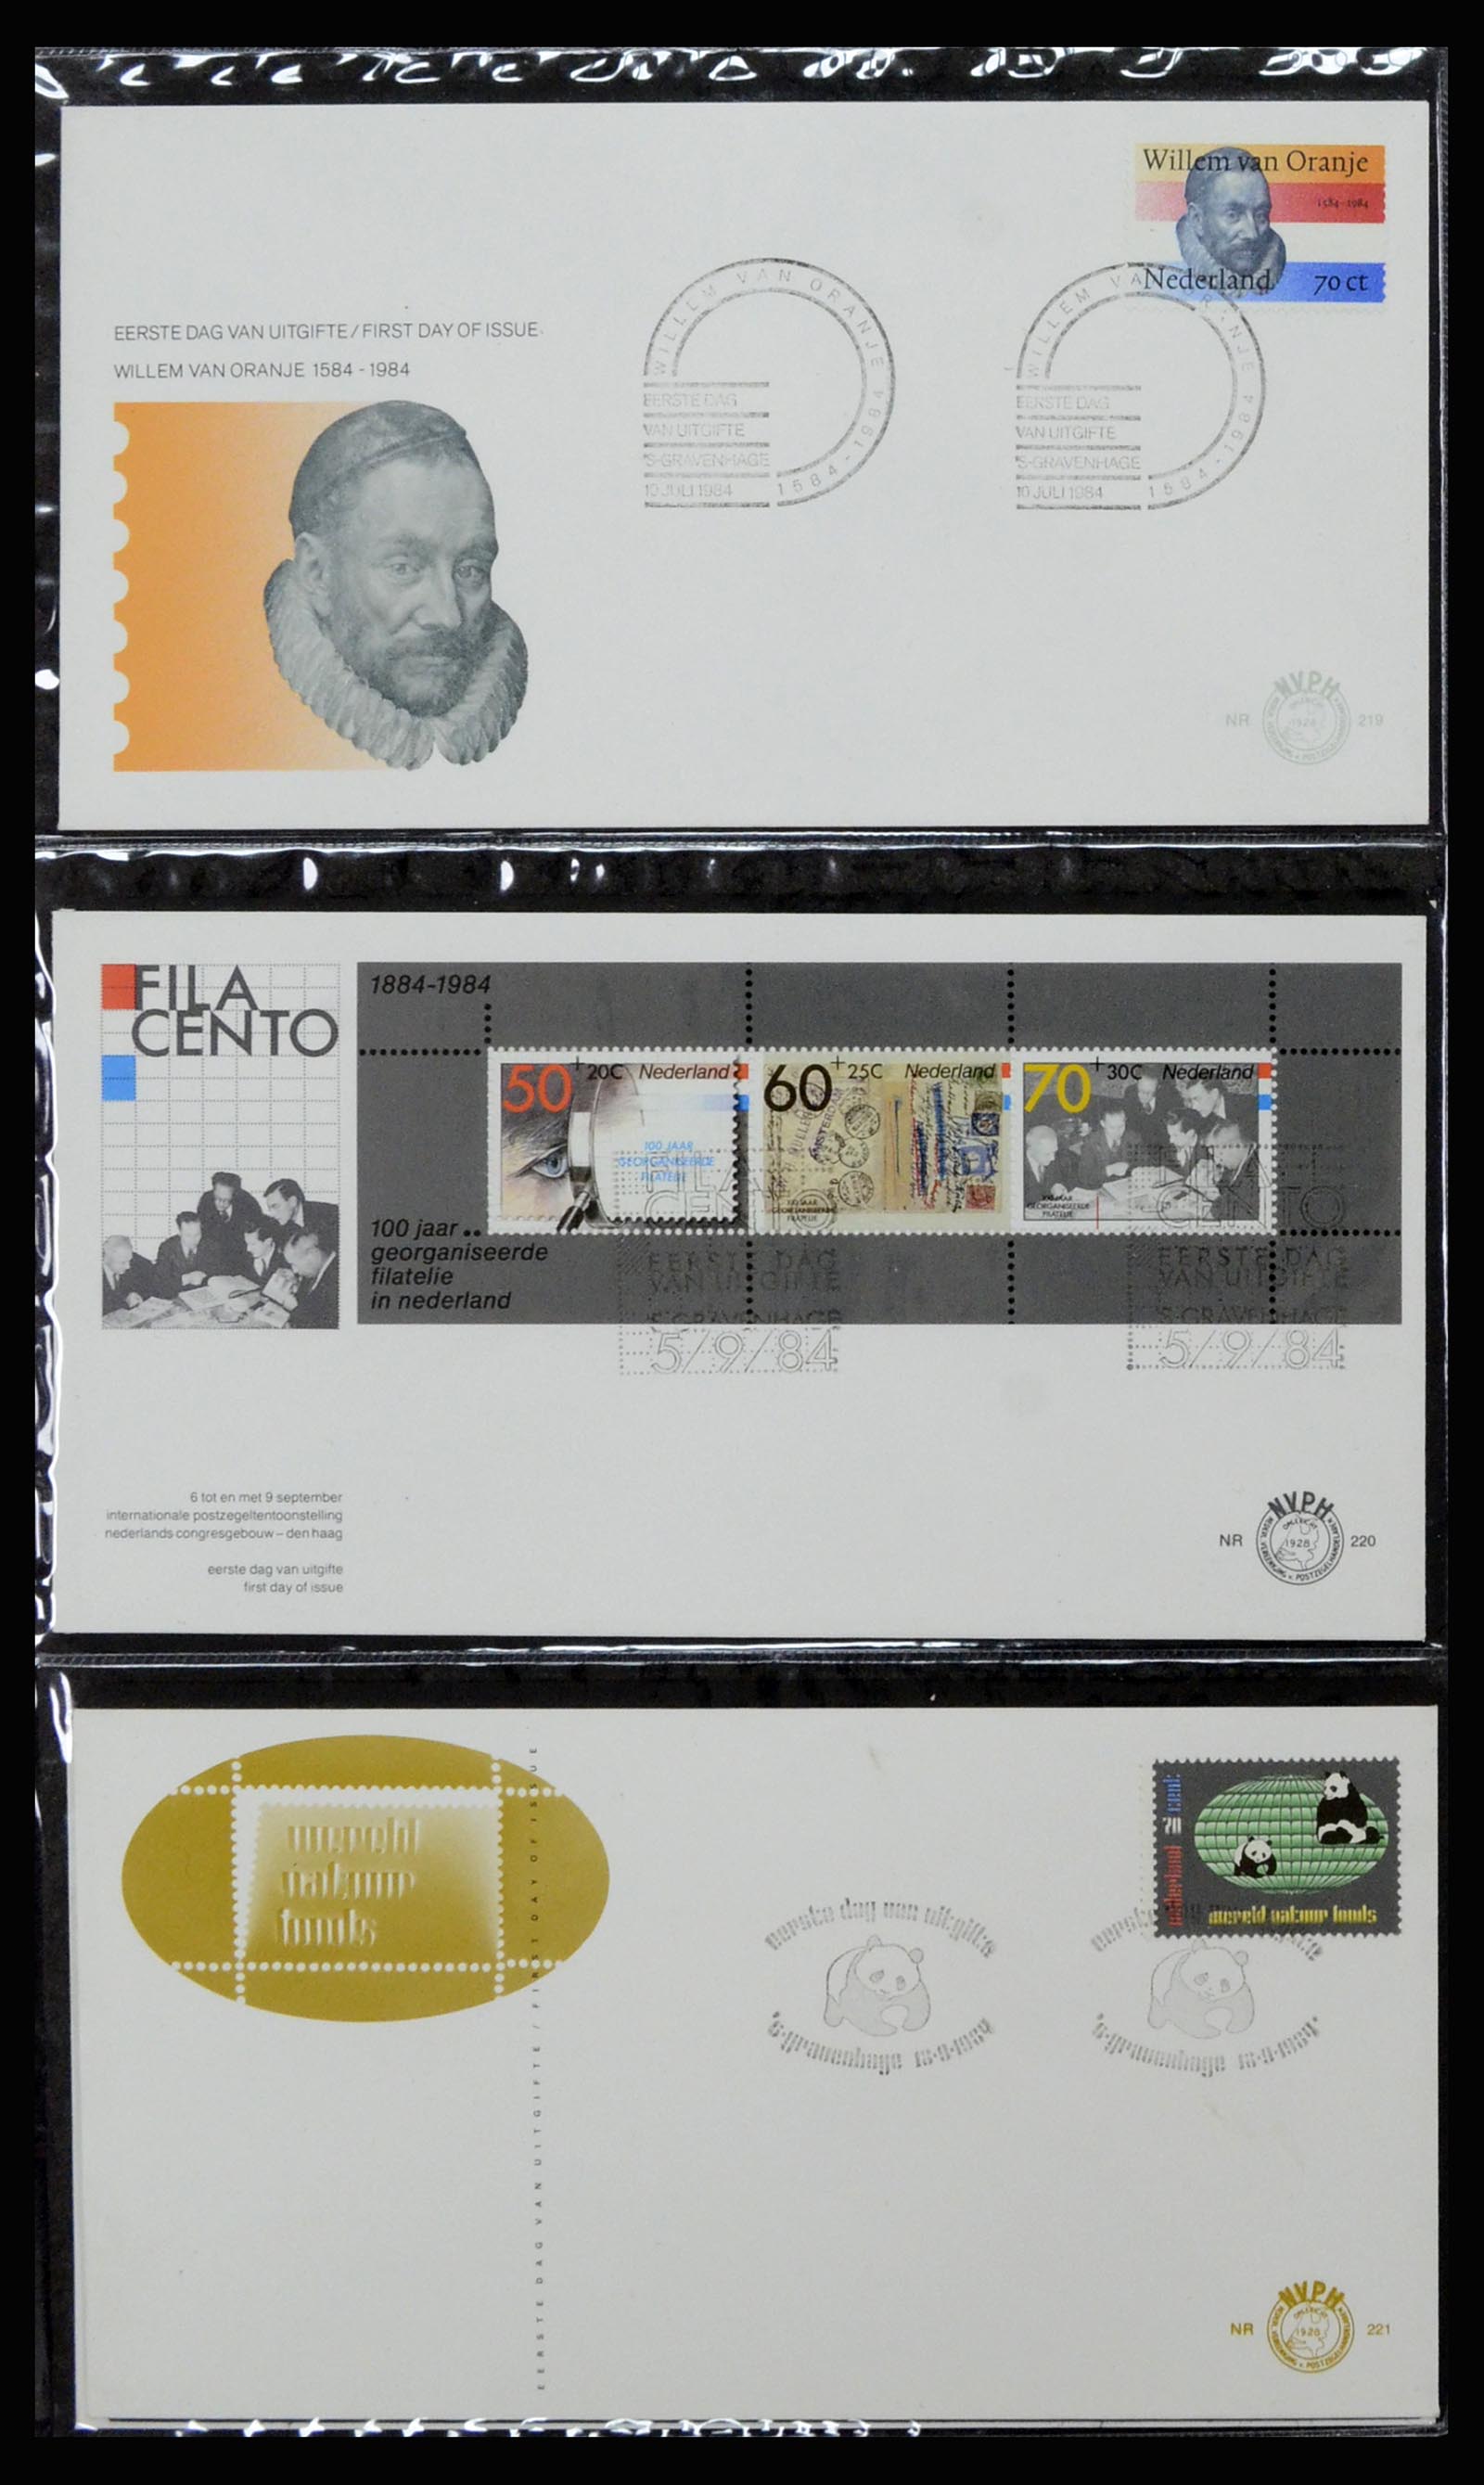 37197 082 - Stamp collection 37197 Netherlands FDC's 1950-2004.